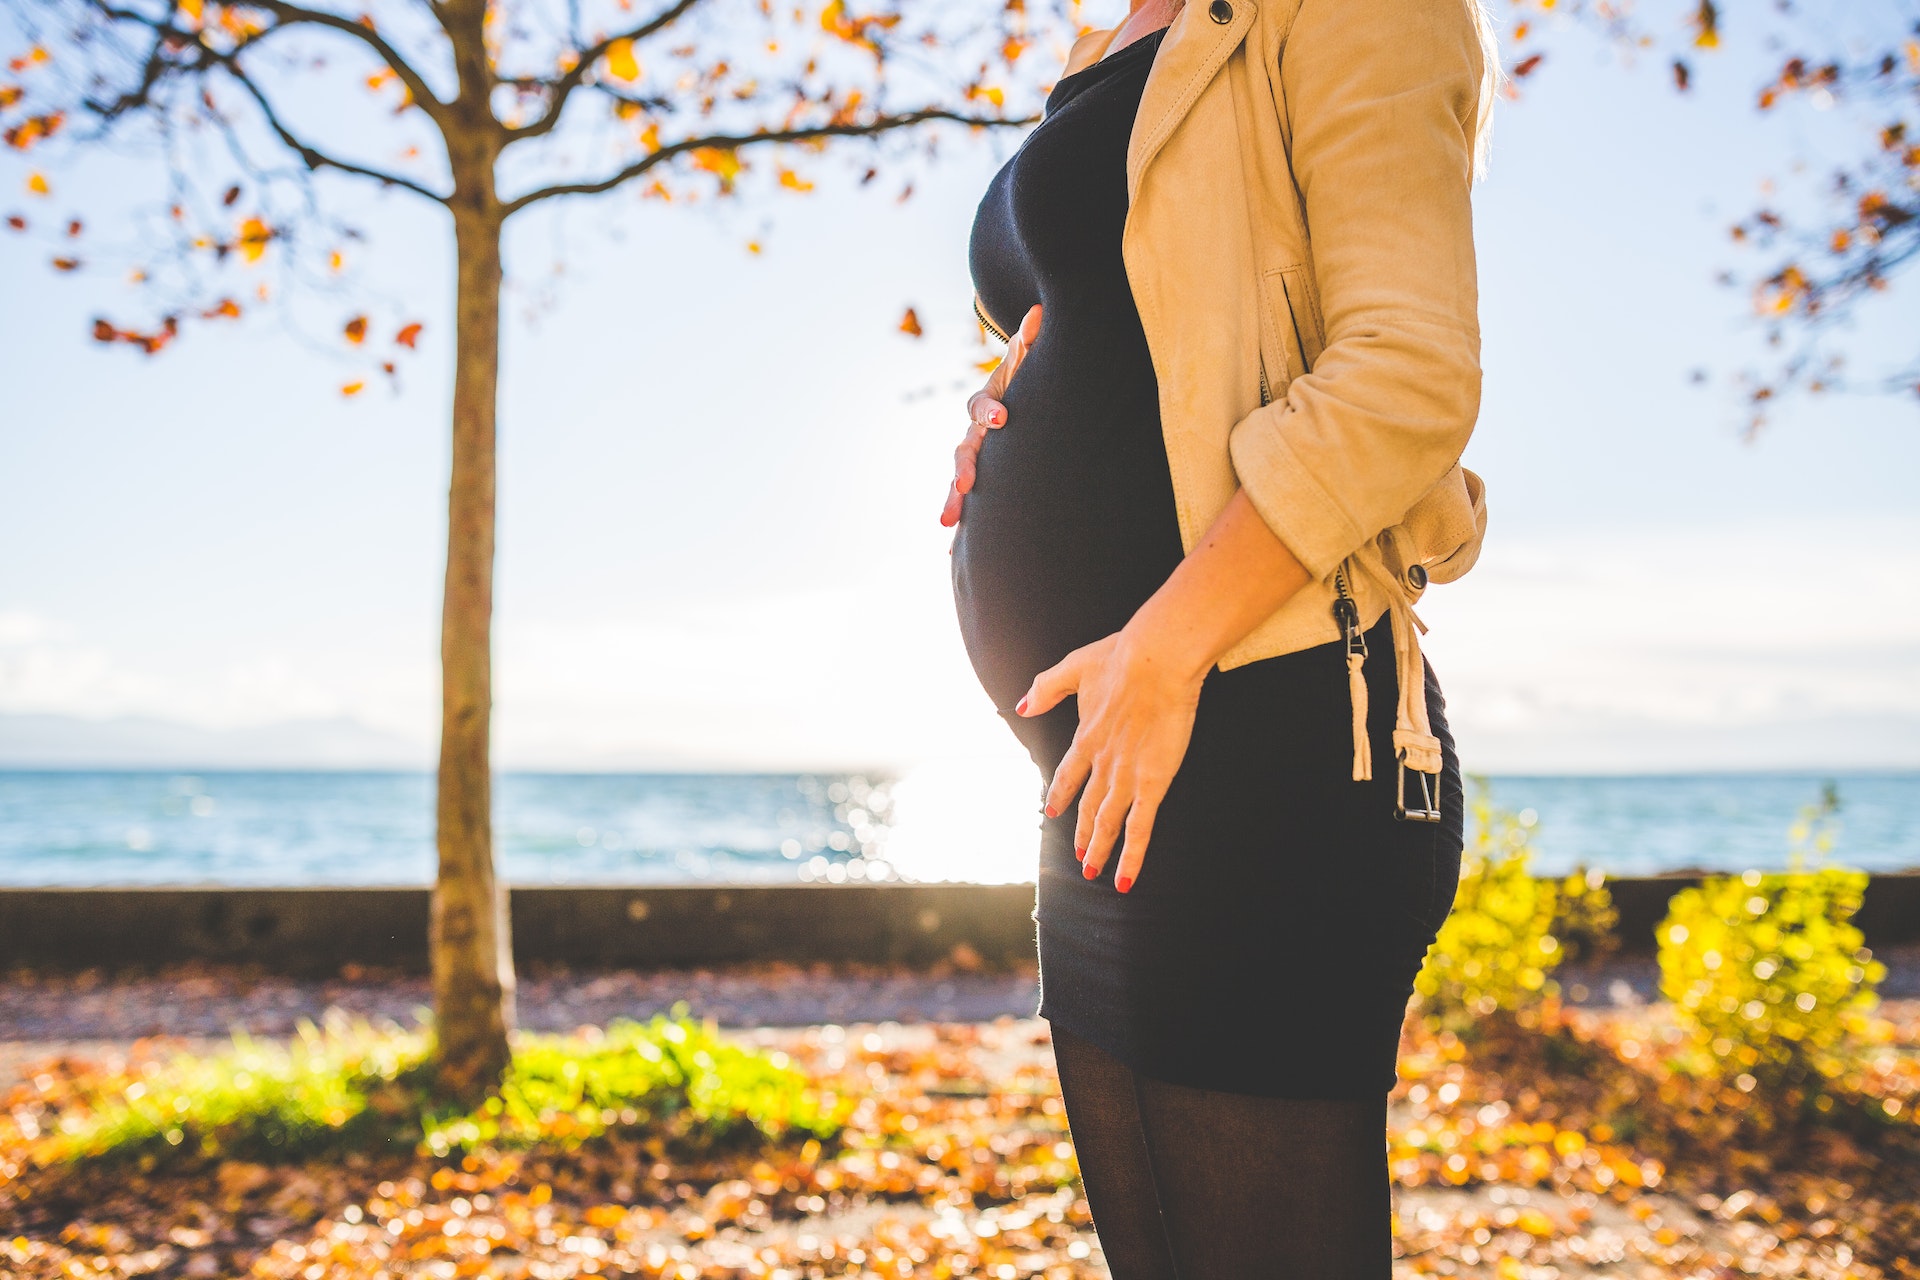 Pregnant person wearing beige jacket standing outside